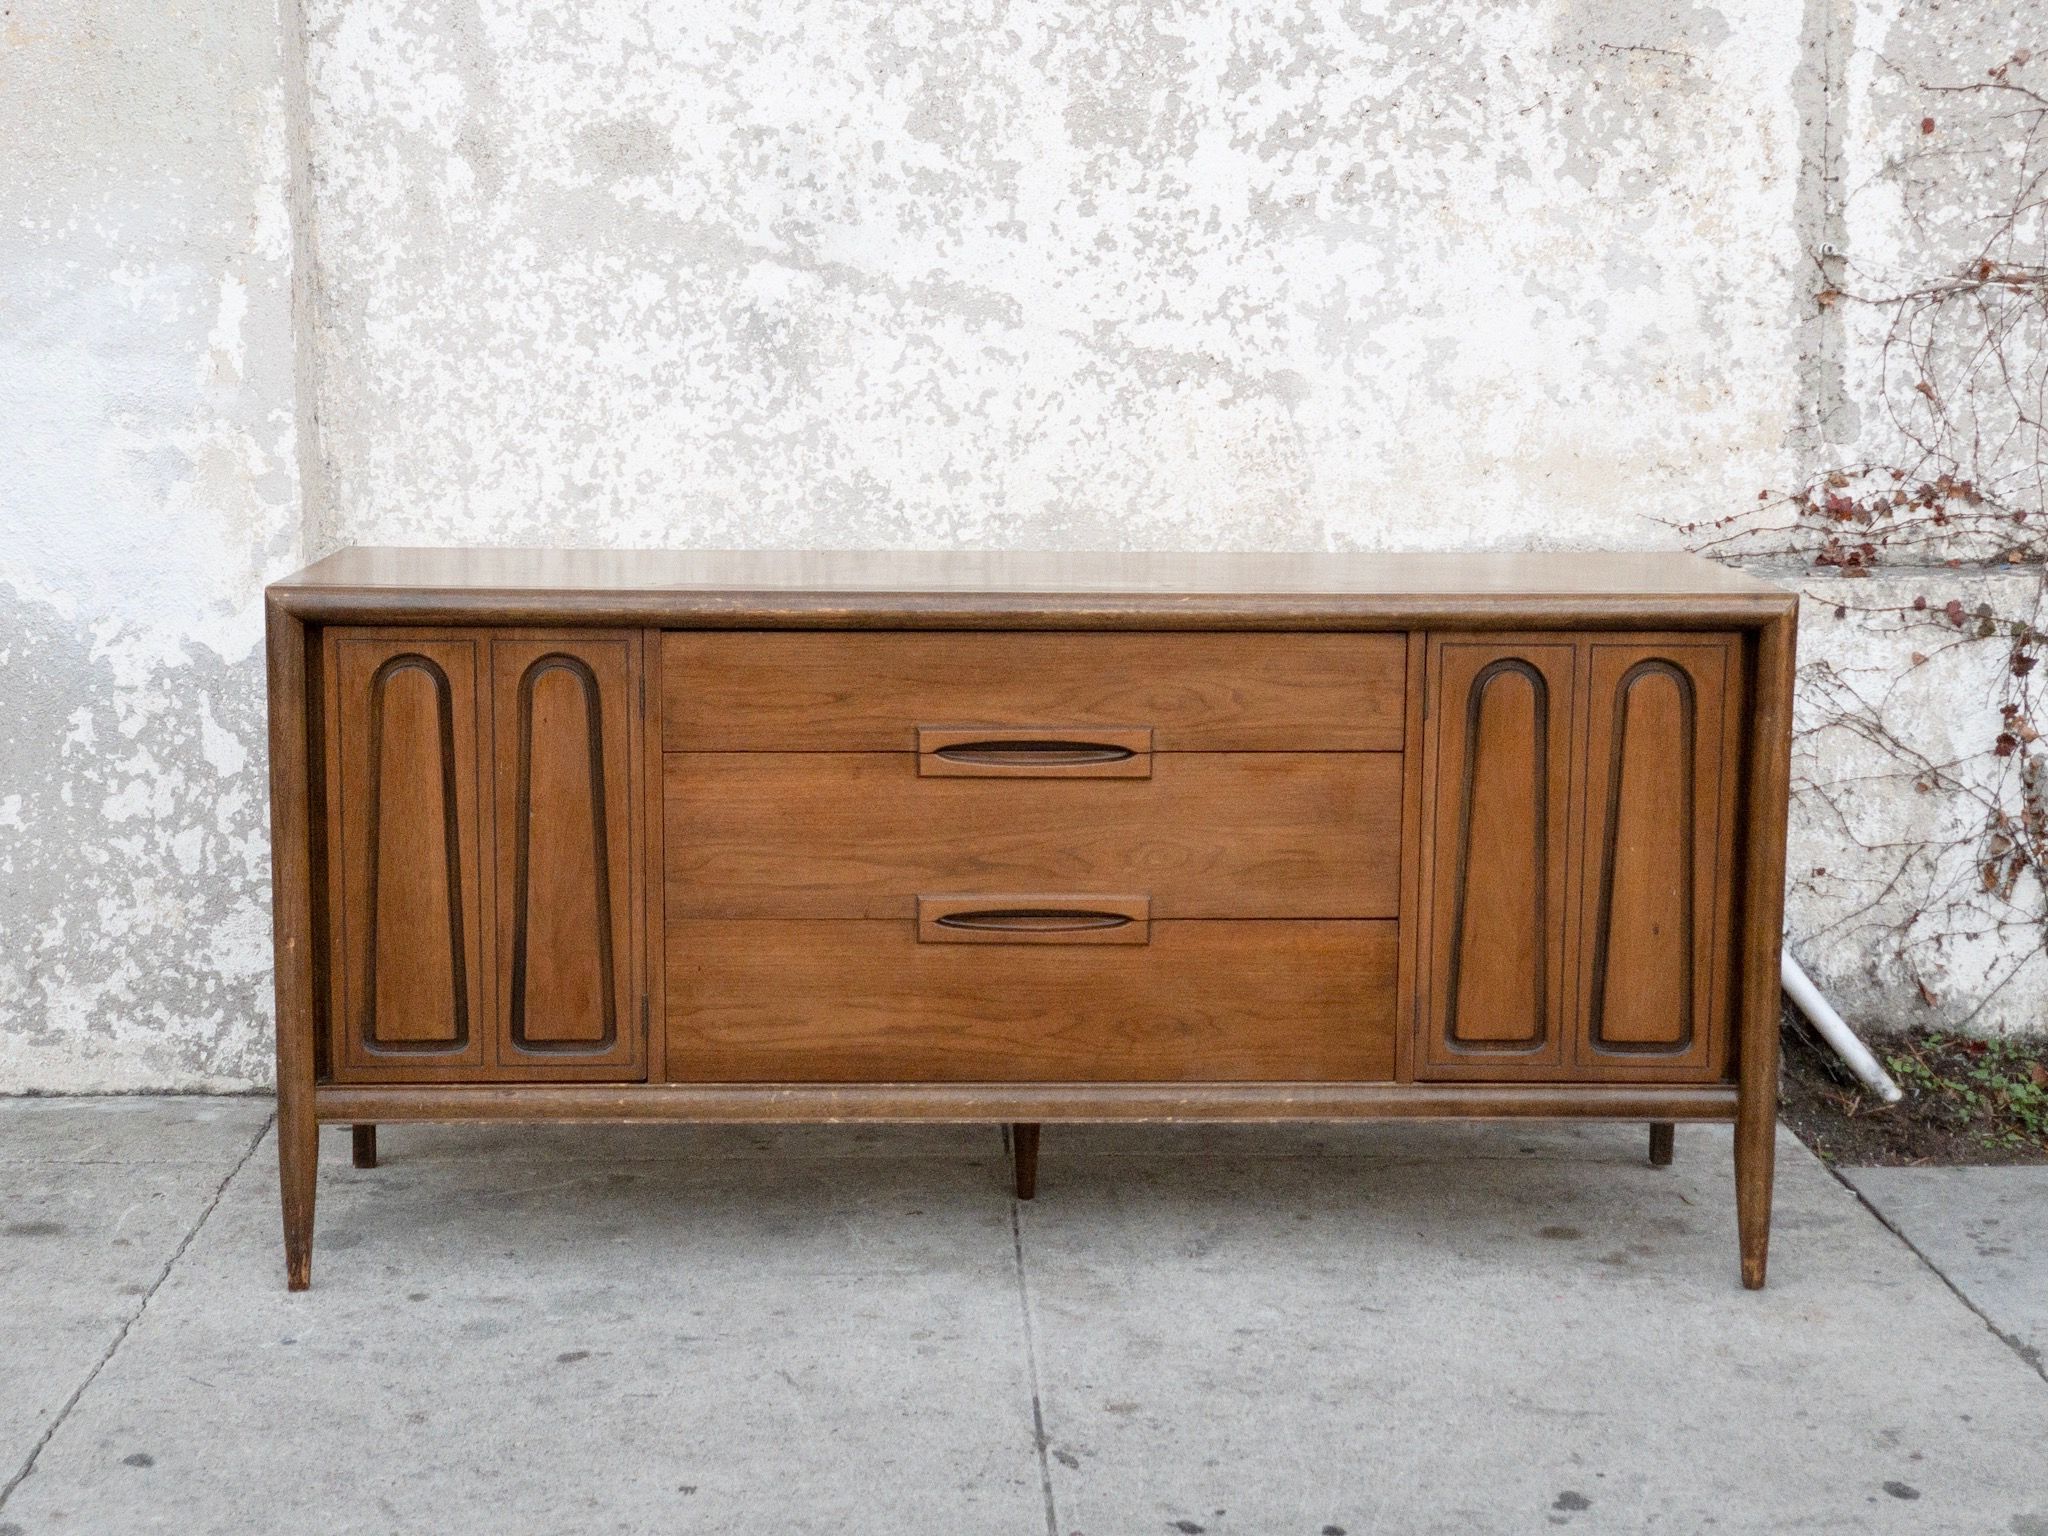 Vintage Bassett Credenza | Another New Place In 2019 Throughout Candide Wood Credenzas (View 8 of 20)